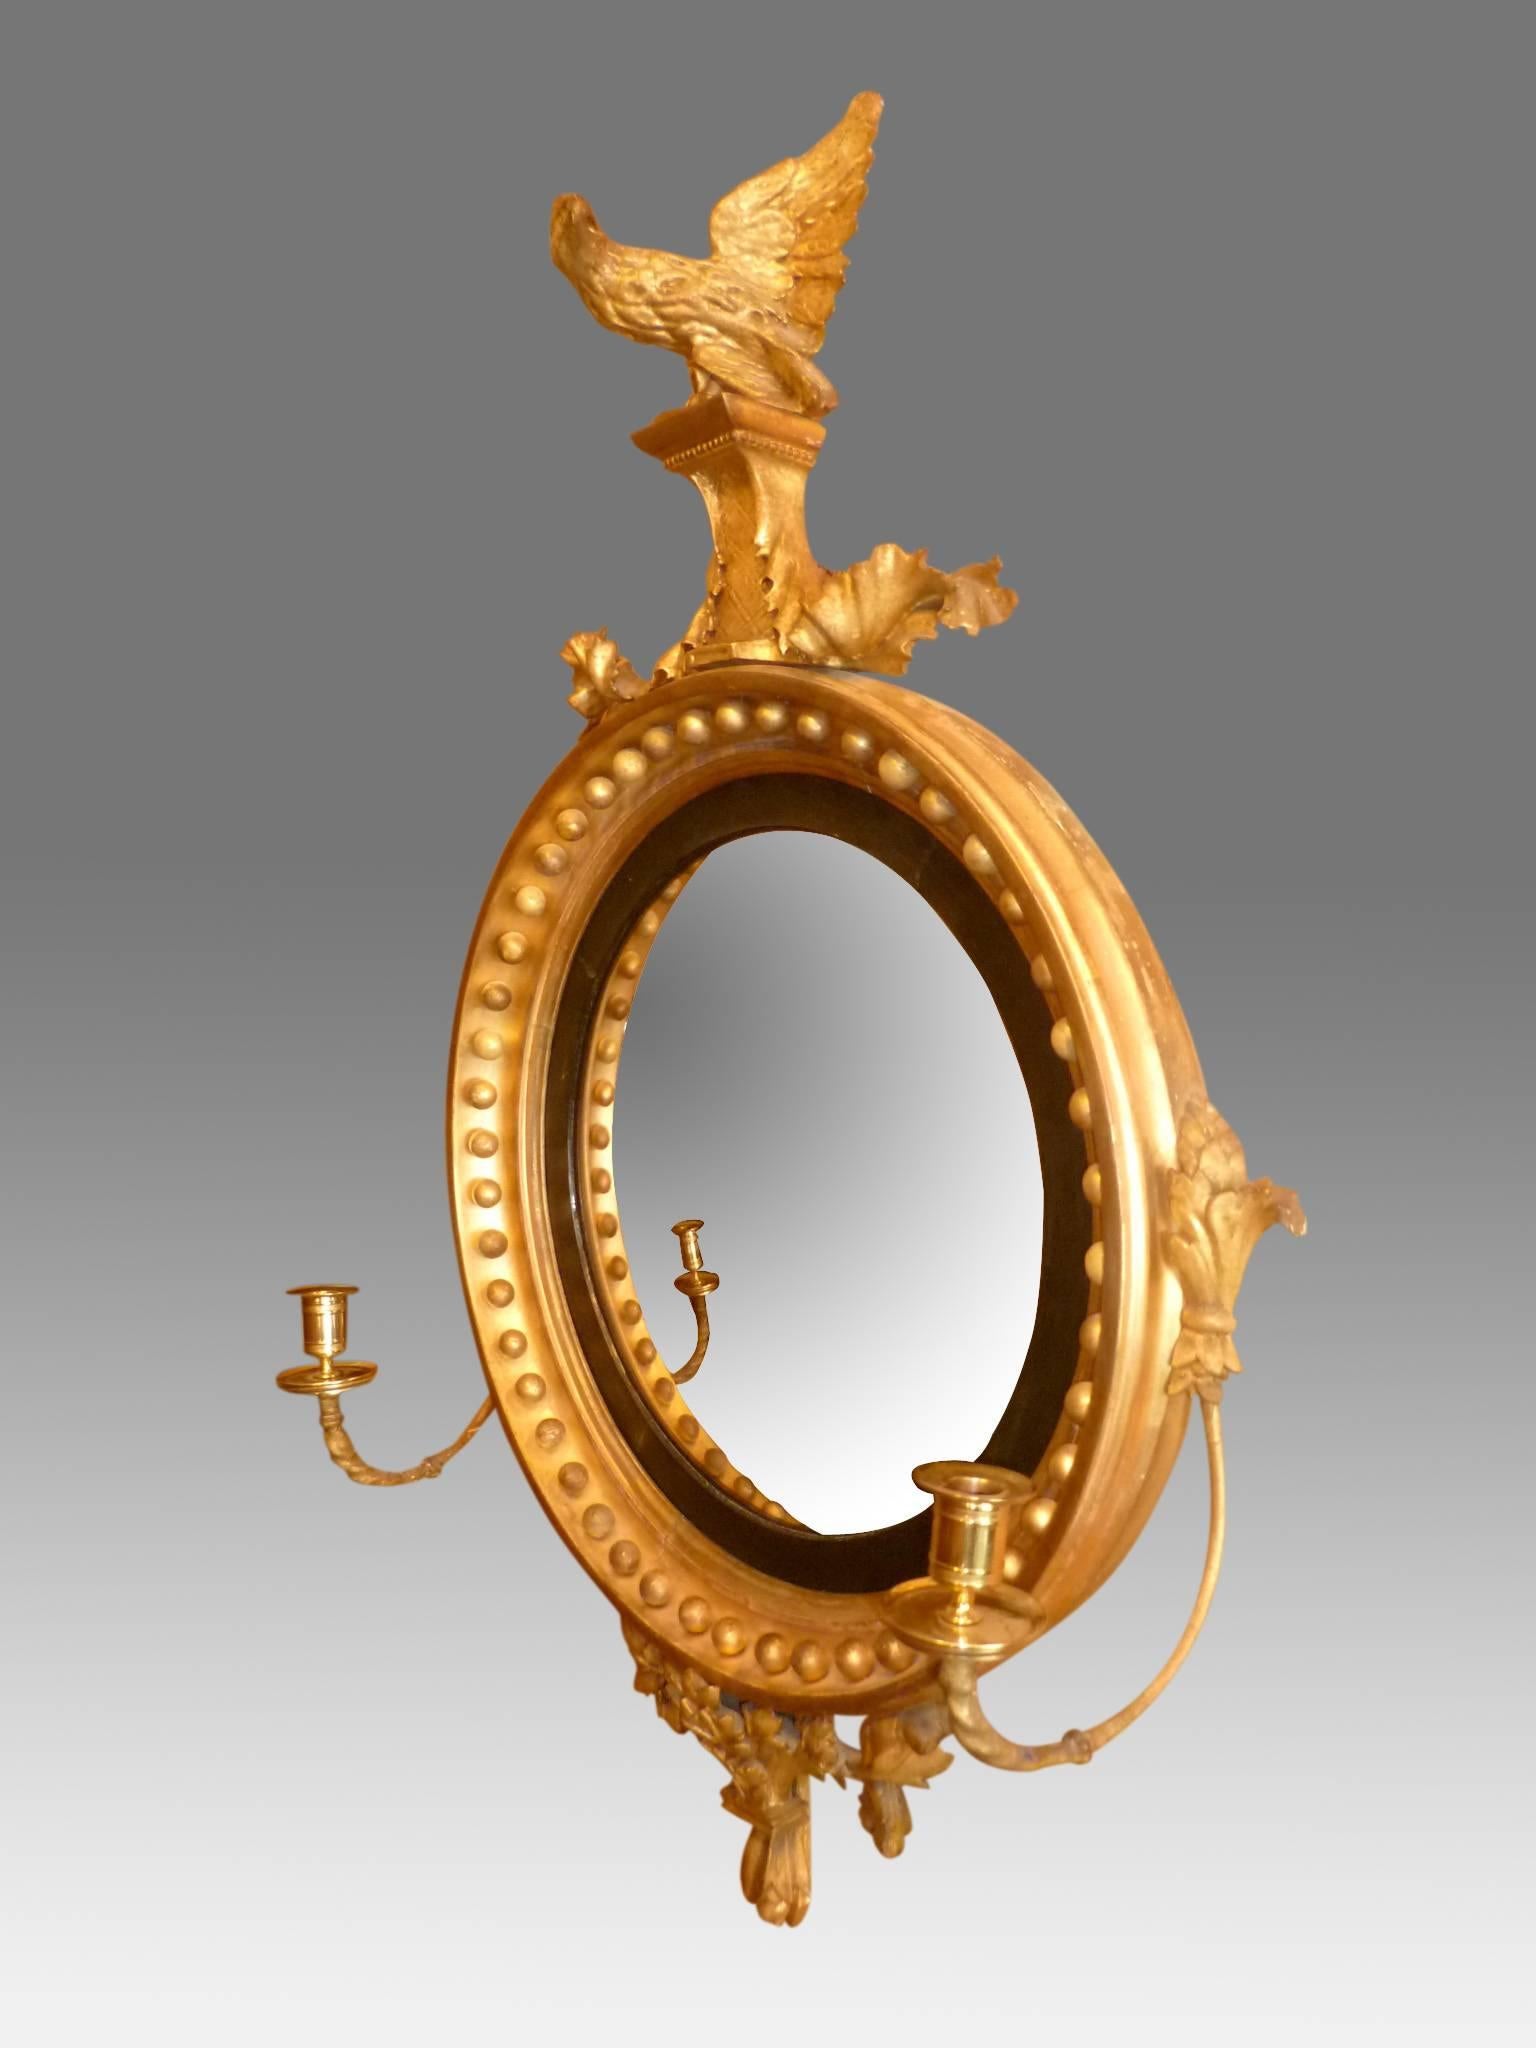 A fine Regency period giltwood convex mirror with carved eagle surmount, perched on a raised platform flanked by carved oak leaves. The reeded ebony sight edge surrounded by gilt balls, with tied leaf pelmet below. Fitted with original scrolled arms